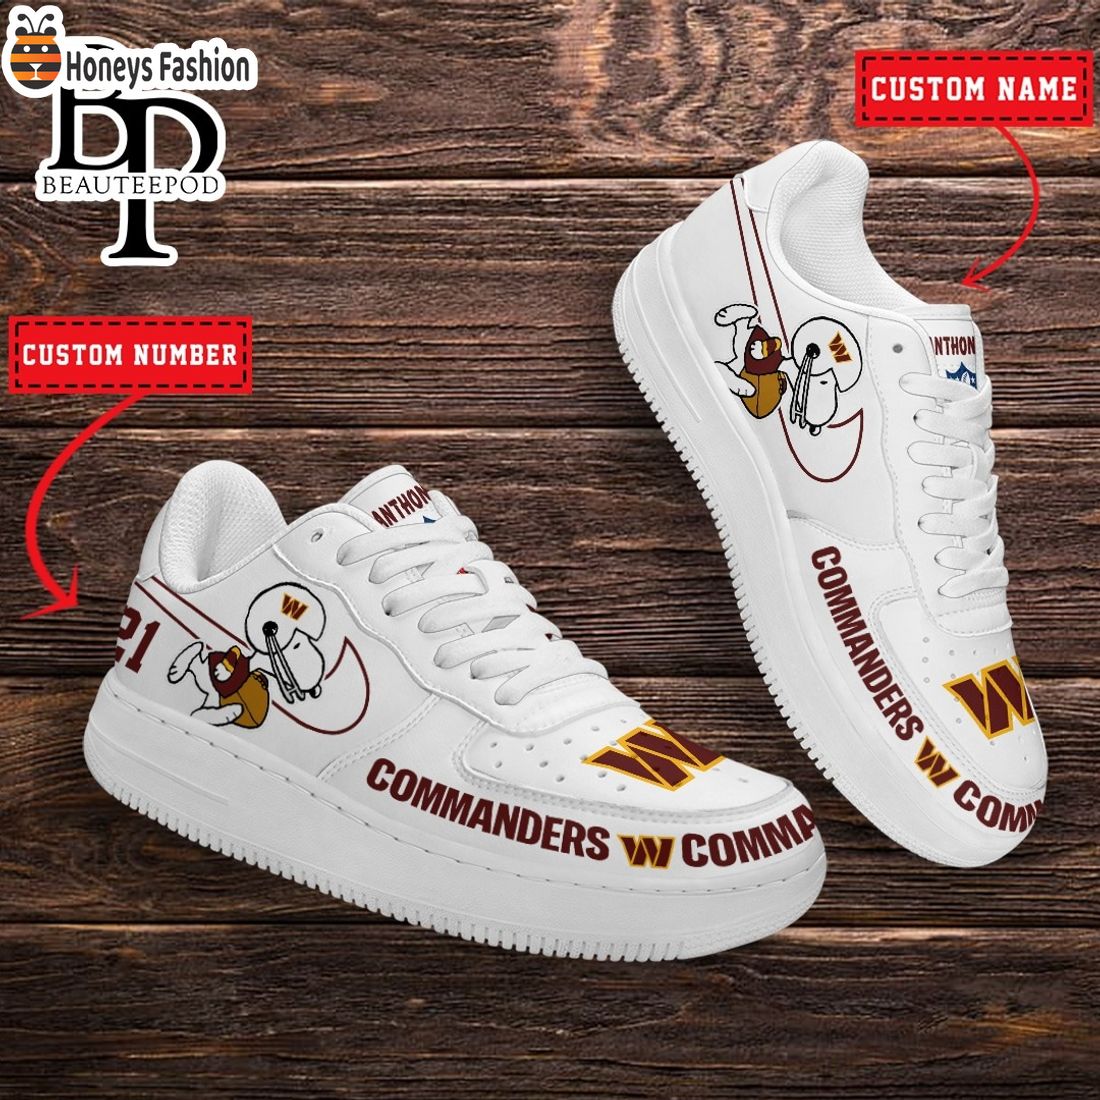 Washington Commanders NFL Snoopy Personalized Air Force 1 Shoes